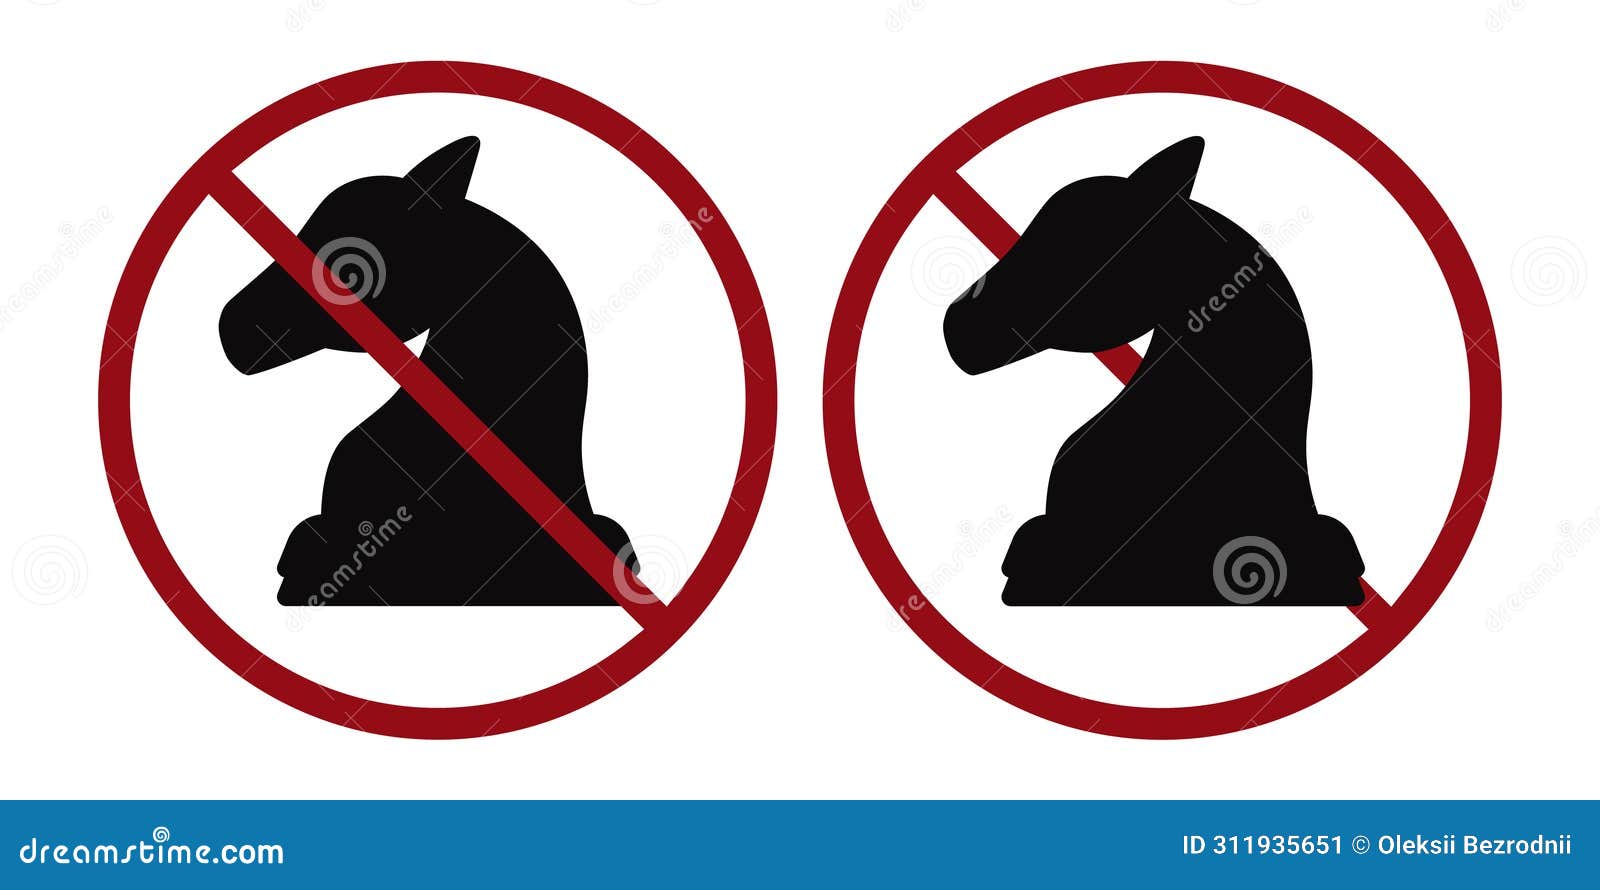 chess ban prohibit icon. not allowed play chess.